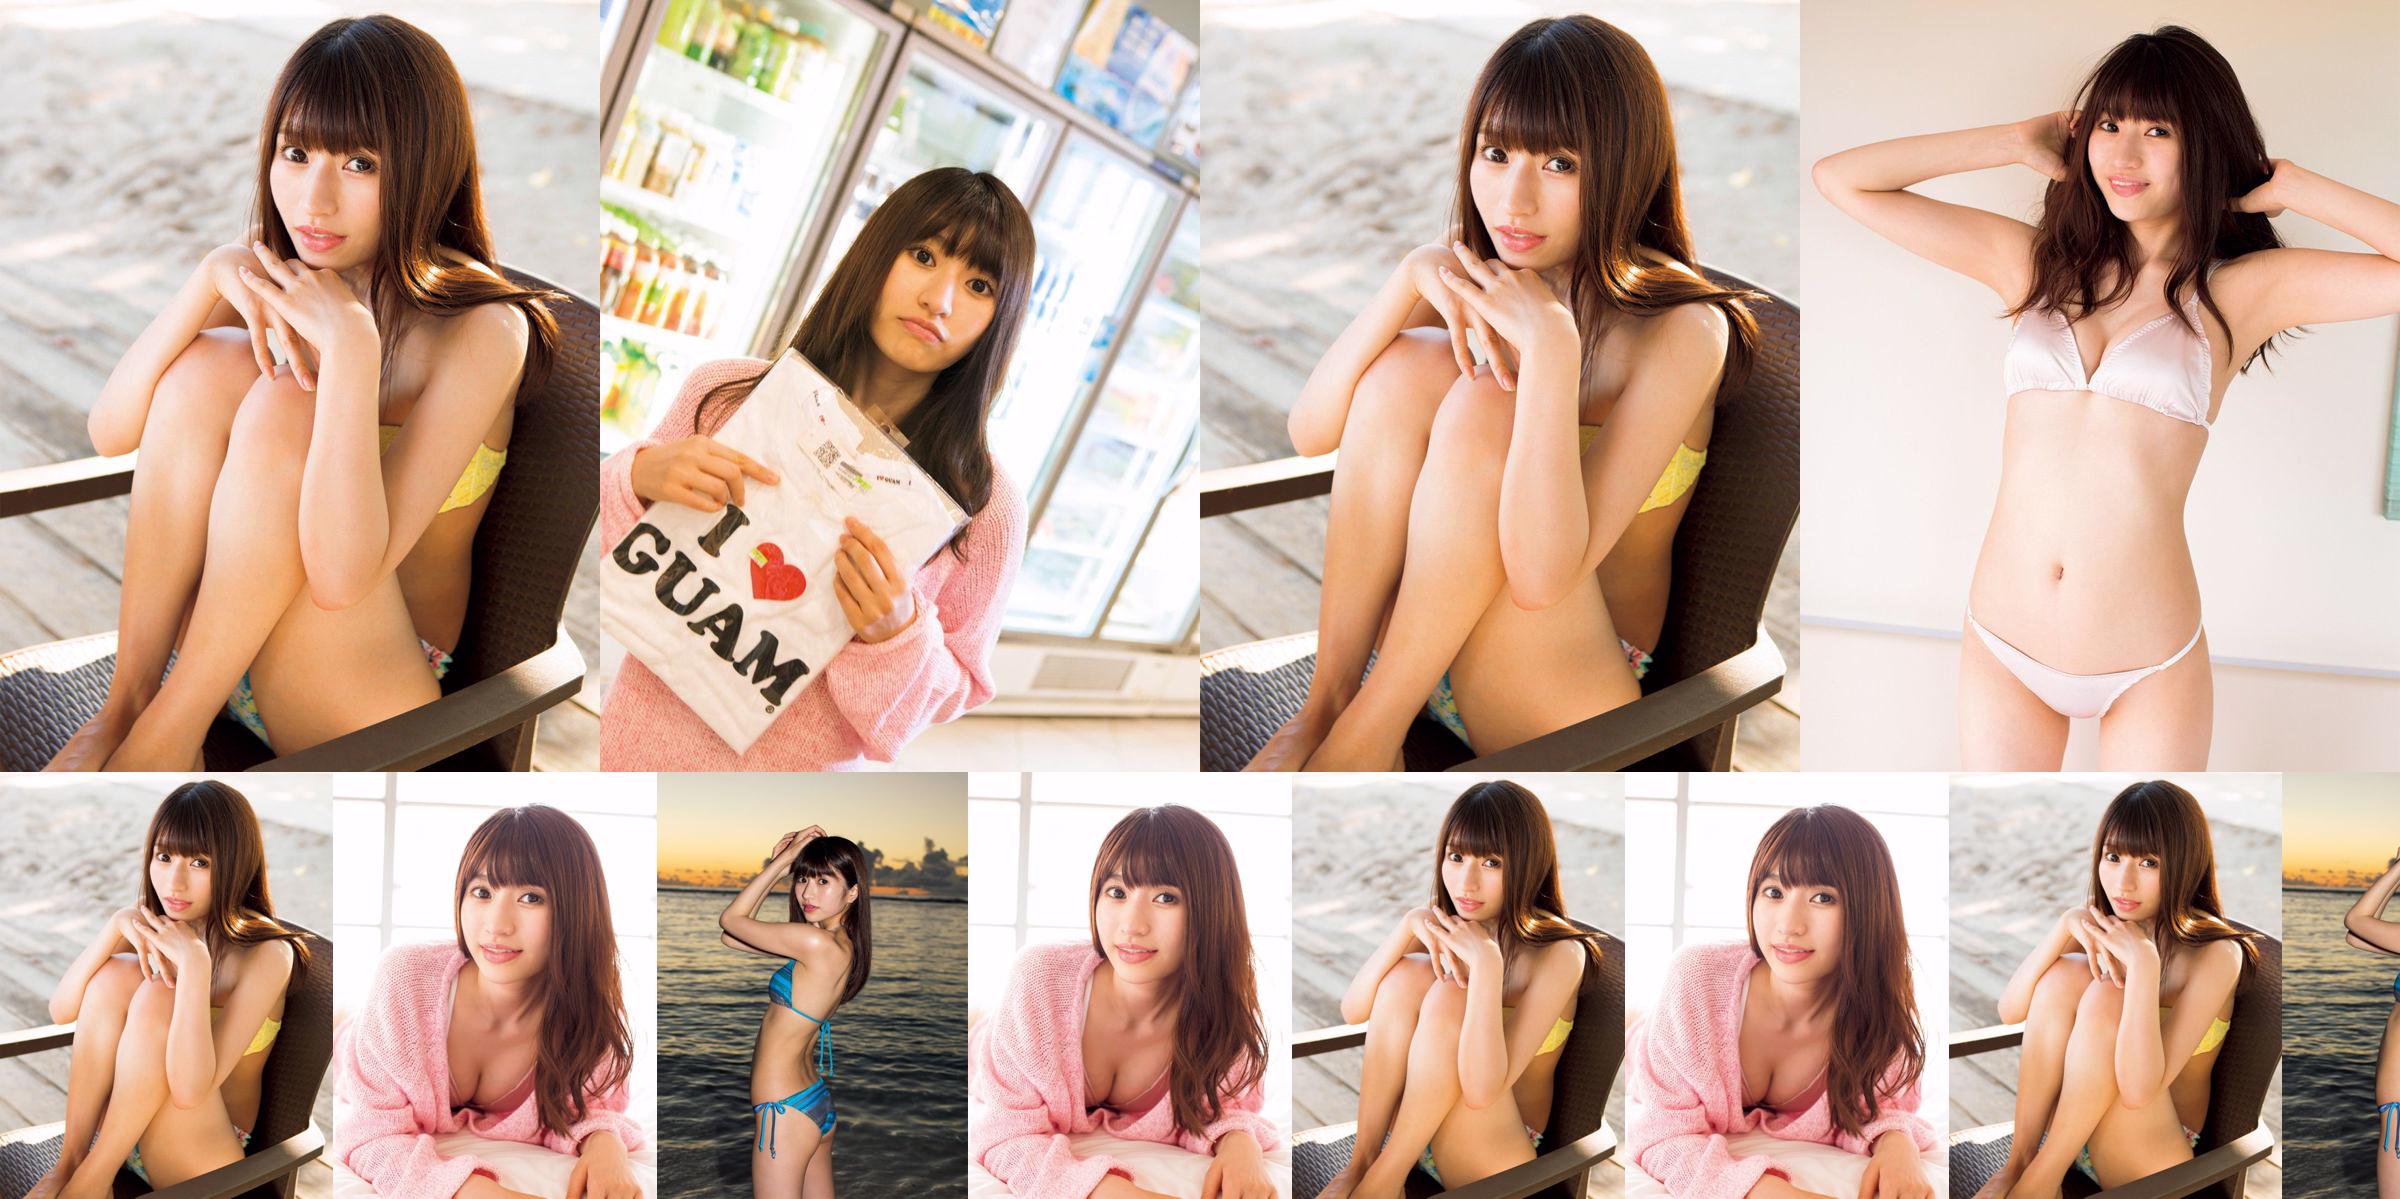 [FRIDAY] Rion "Small Devil Beauty" Photo No.4a2753 Page 2